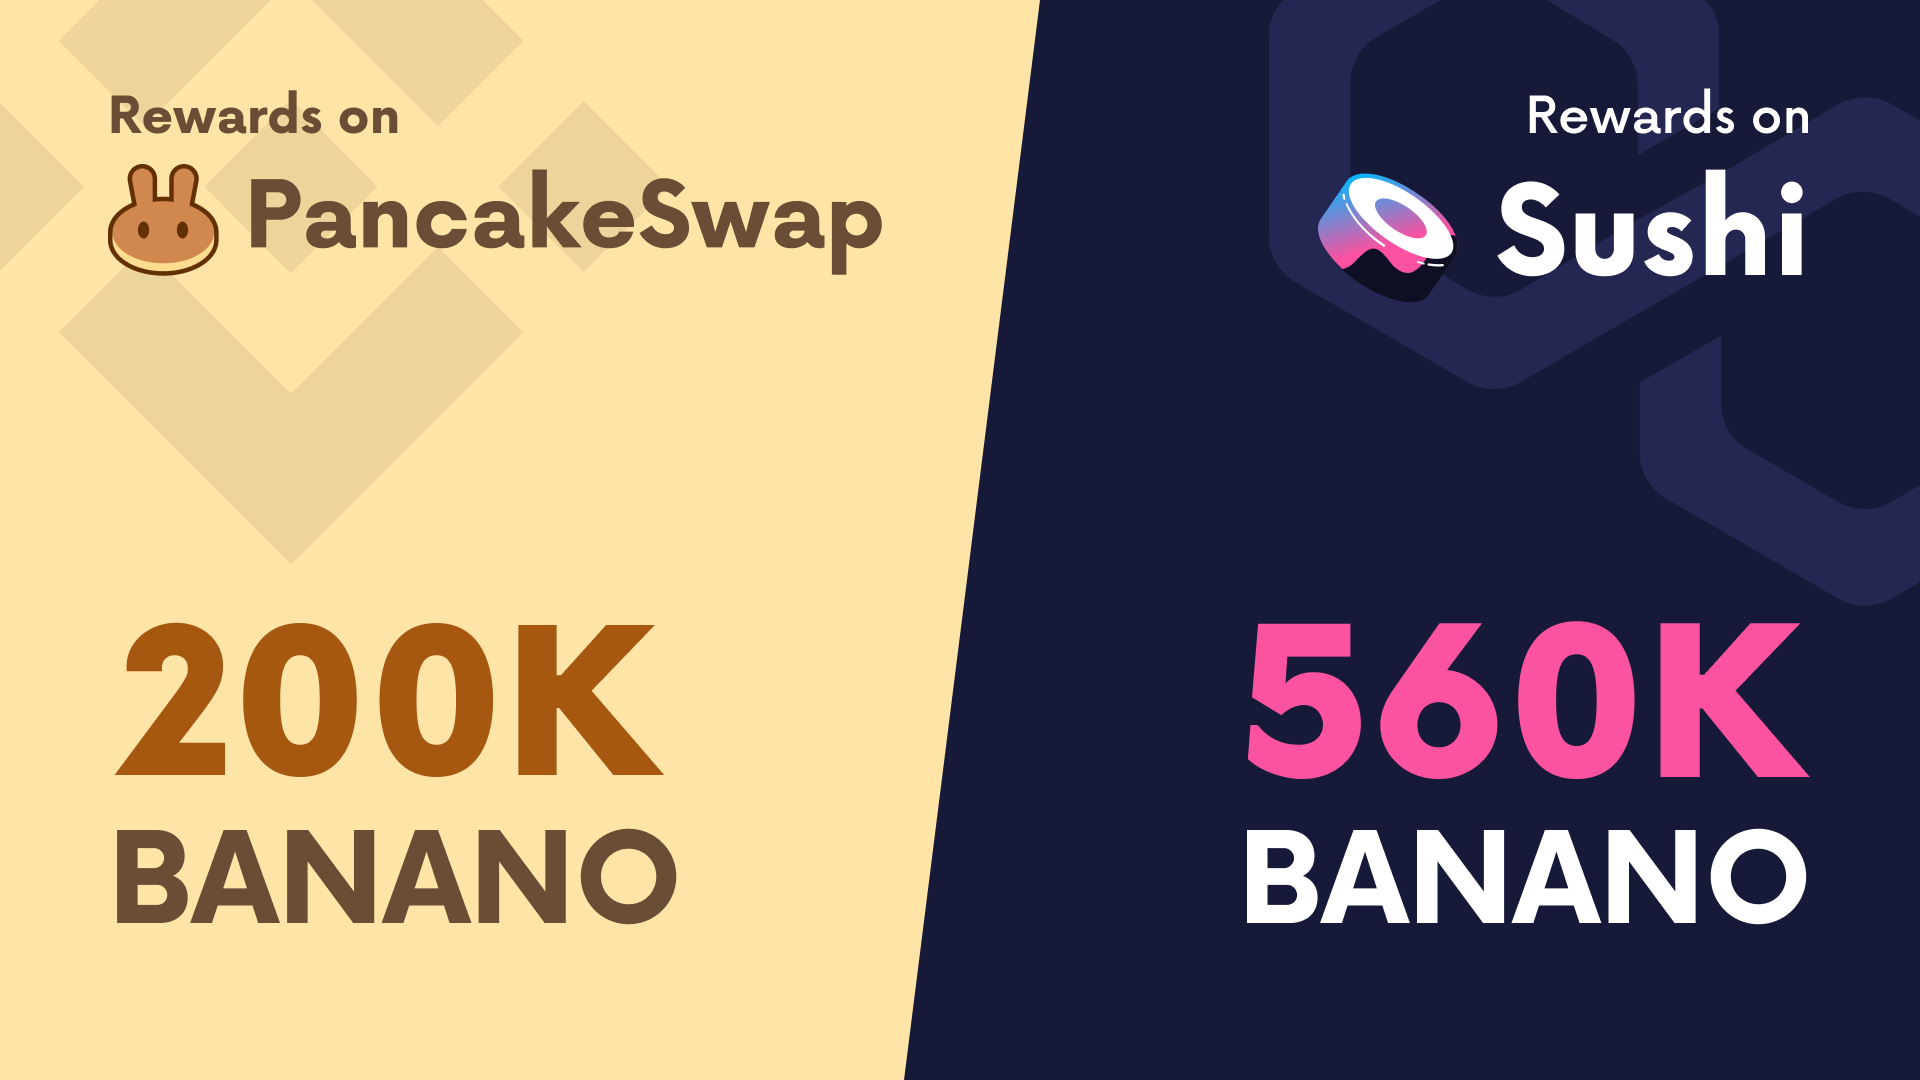 Wrapped BANANO (wBAN) Updates — New PancakeSwap farm and changes to SushiSwap farm